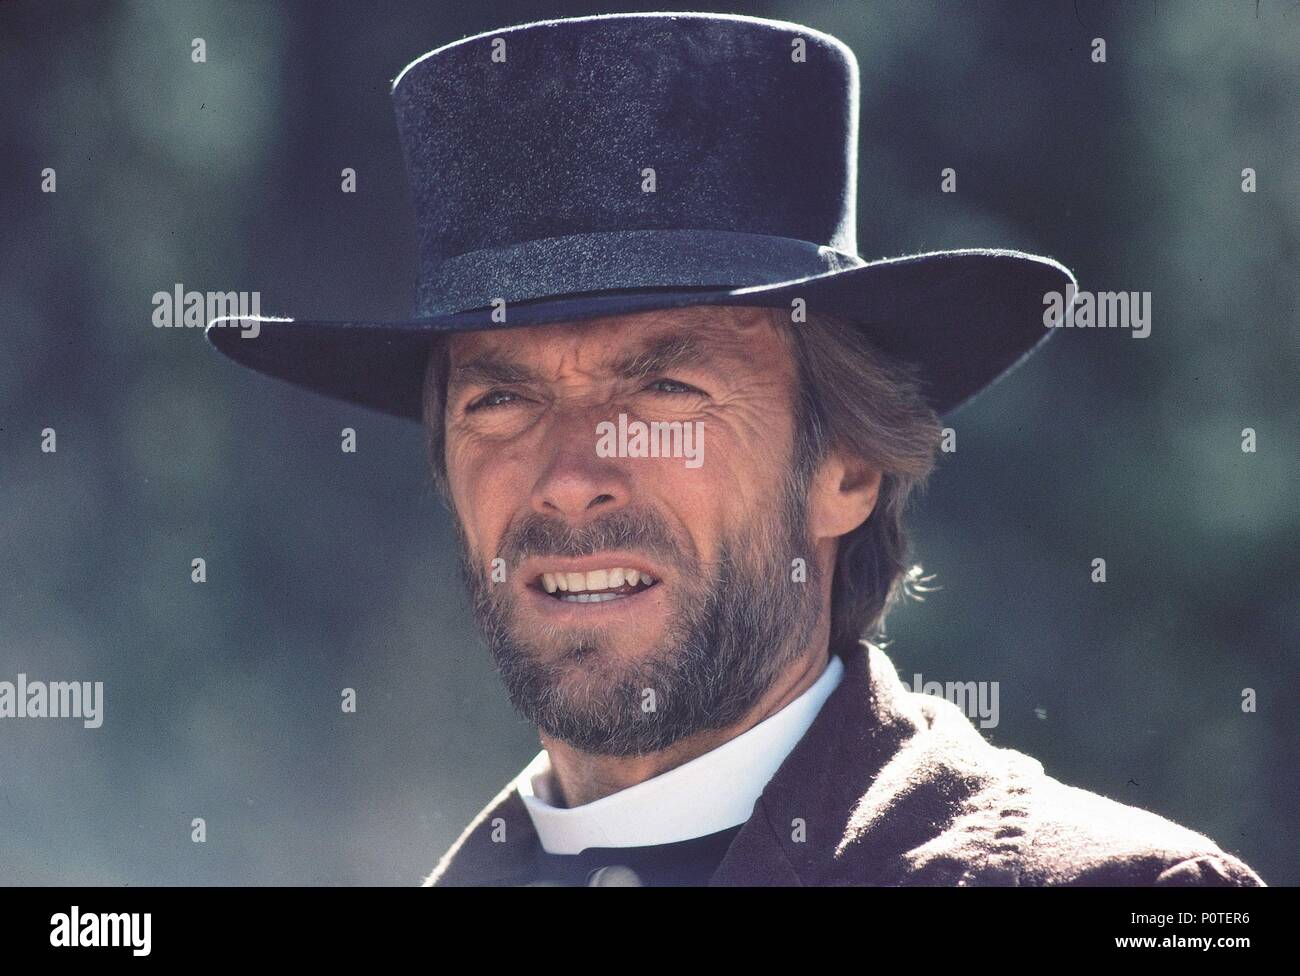 Original Film Title: PALE RIDER.  English Title: PALE RIDER.  Film Director: CLINT EASTWOOD.  Year: 1985.  Stars: CLINT EASTWOOD. Credit: WARNER BROTHERS / Album Stock Photo